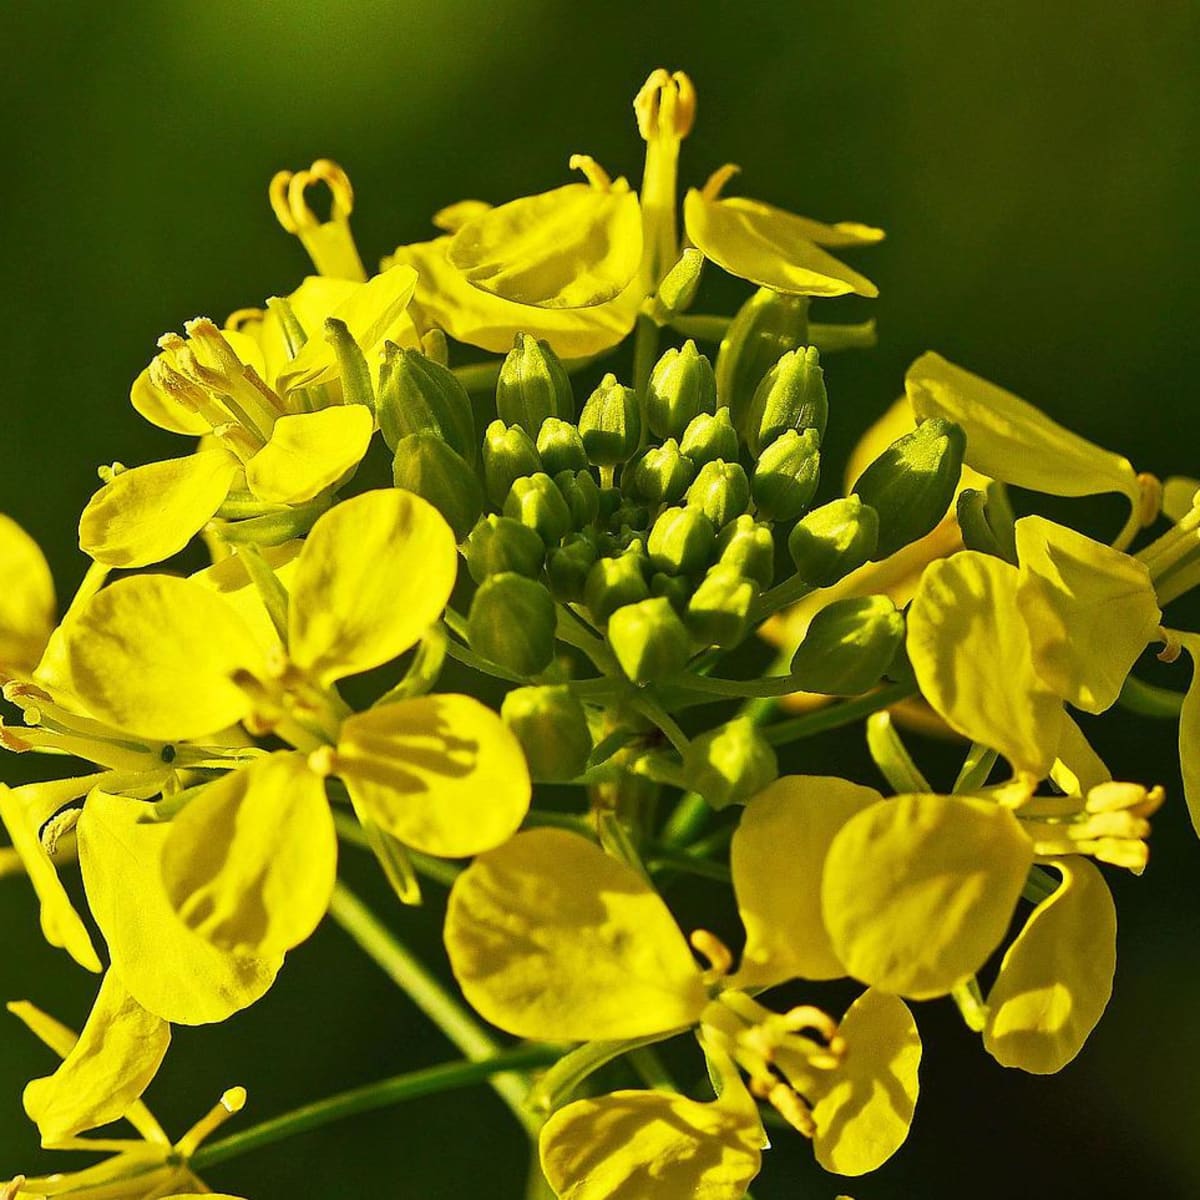 Mustard Flowers Information and Facts